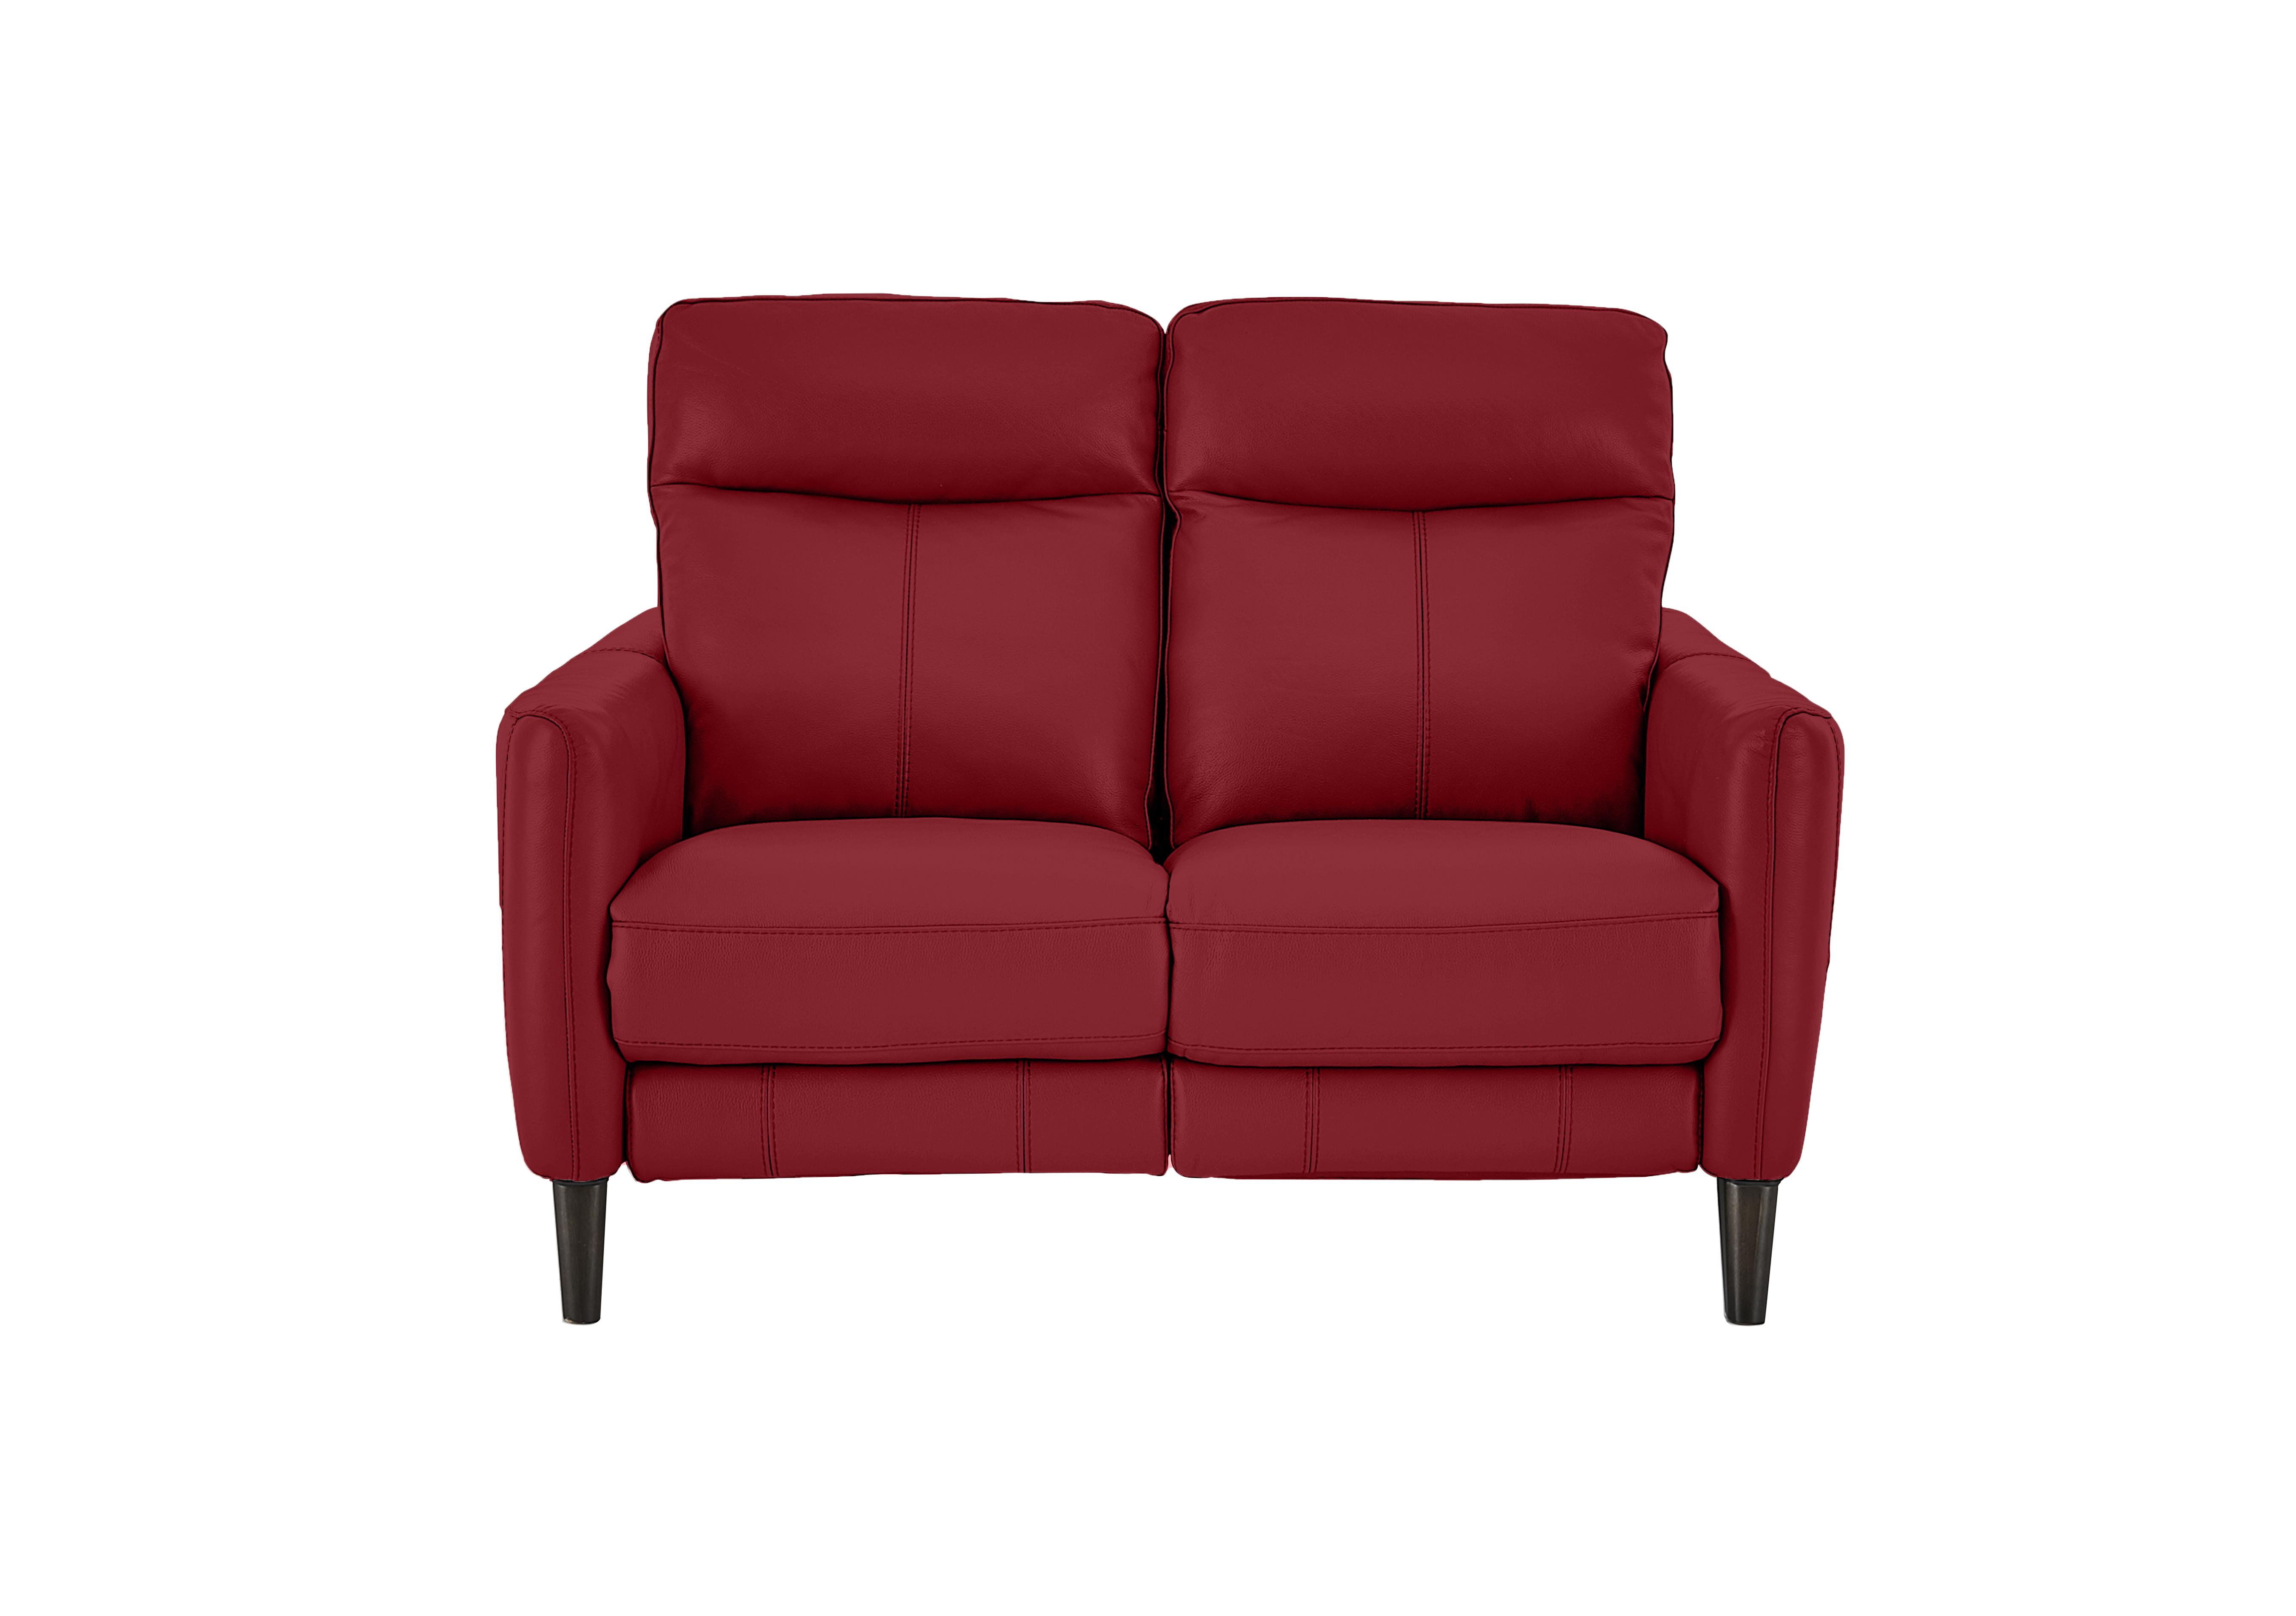 Compact Collection Petit 2 Seater Leather Sofa in Bv-0008 Pure Red on Furniture Village